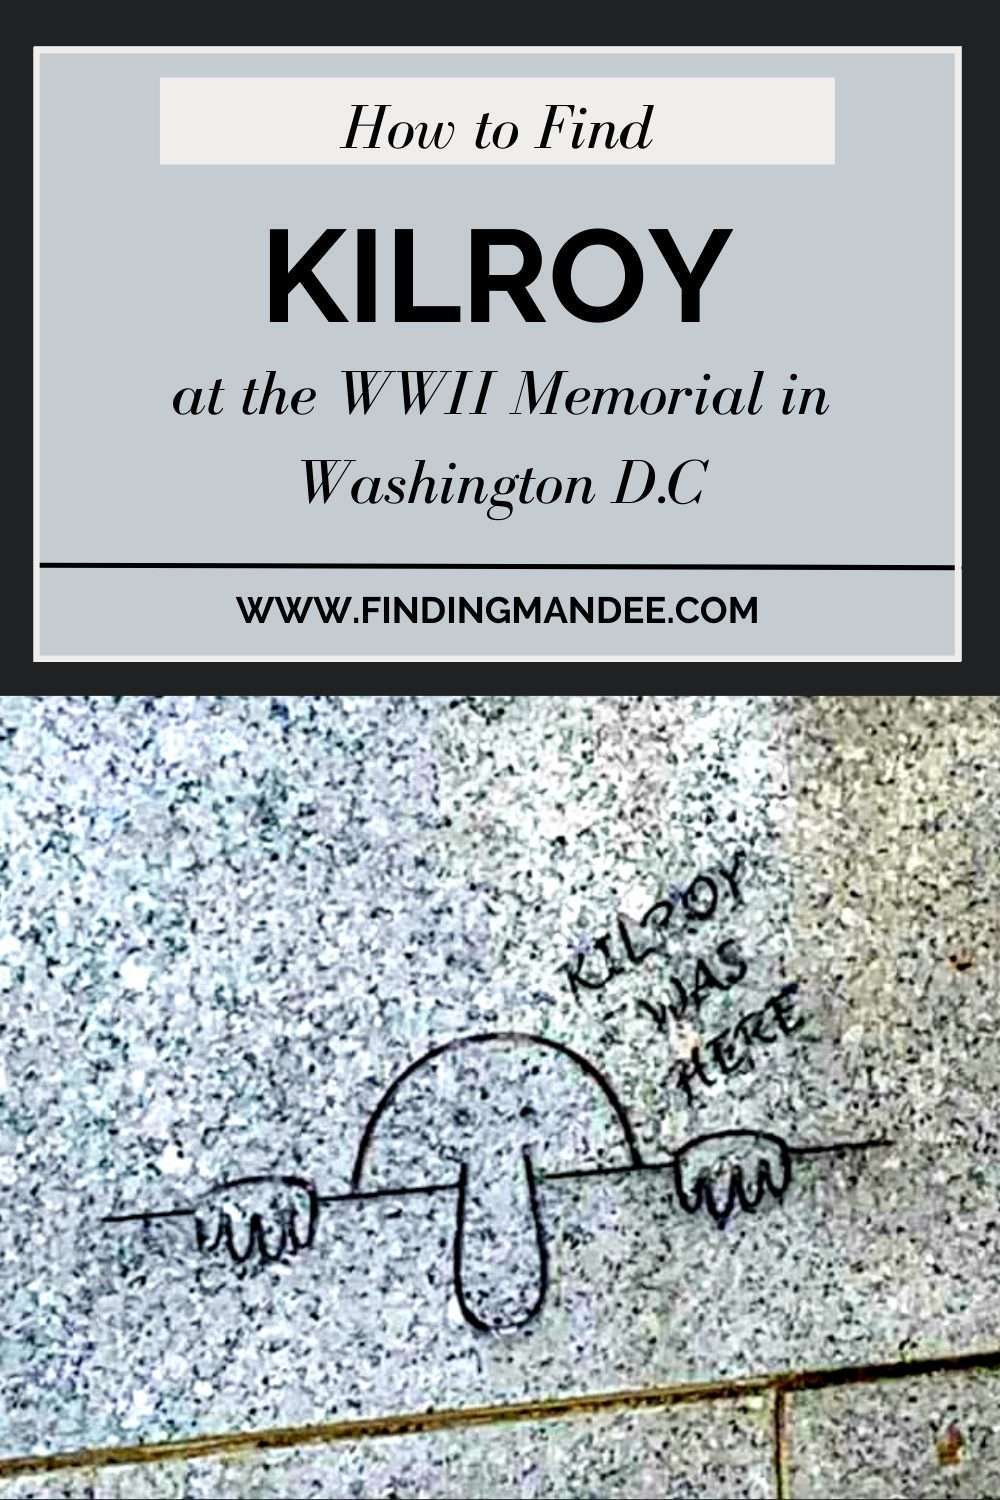 How to Find Kilroy at the WWII Memorial in Washington D.C.